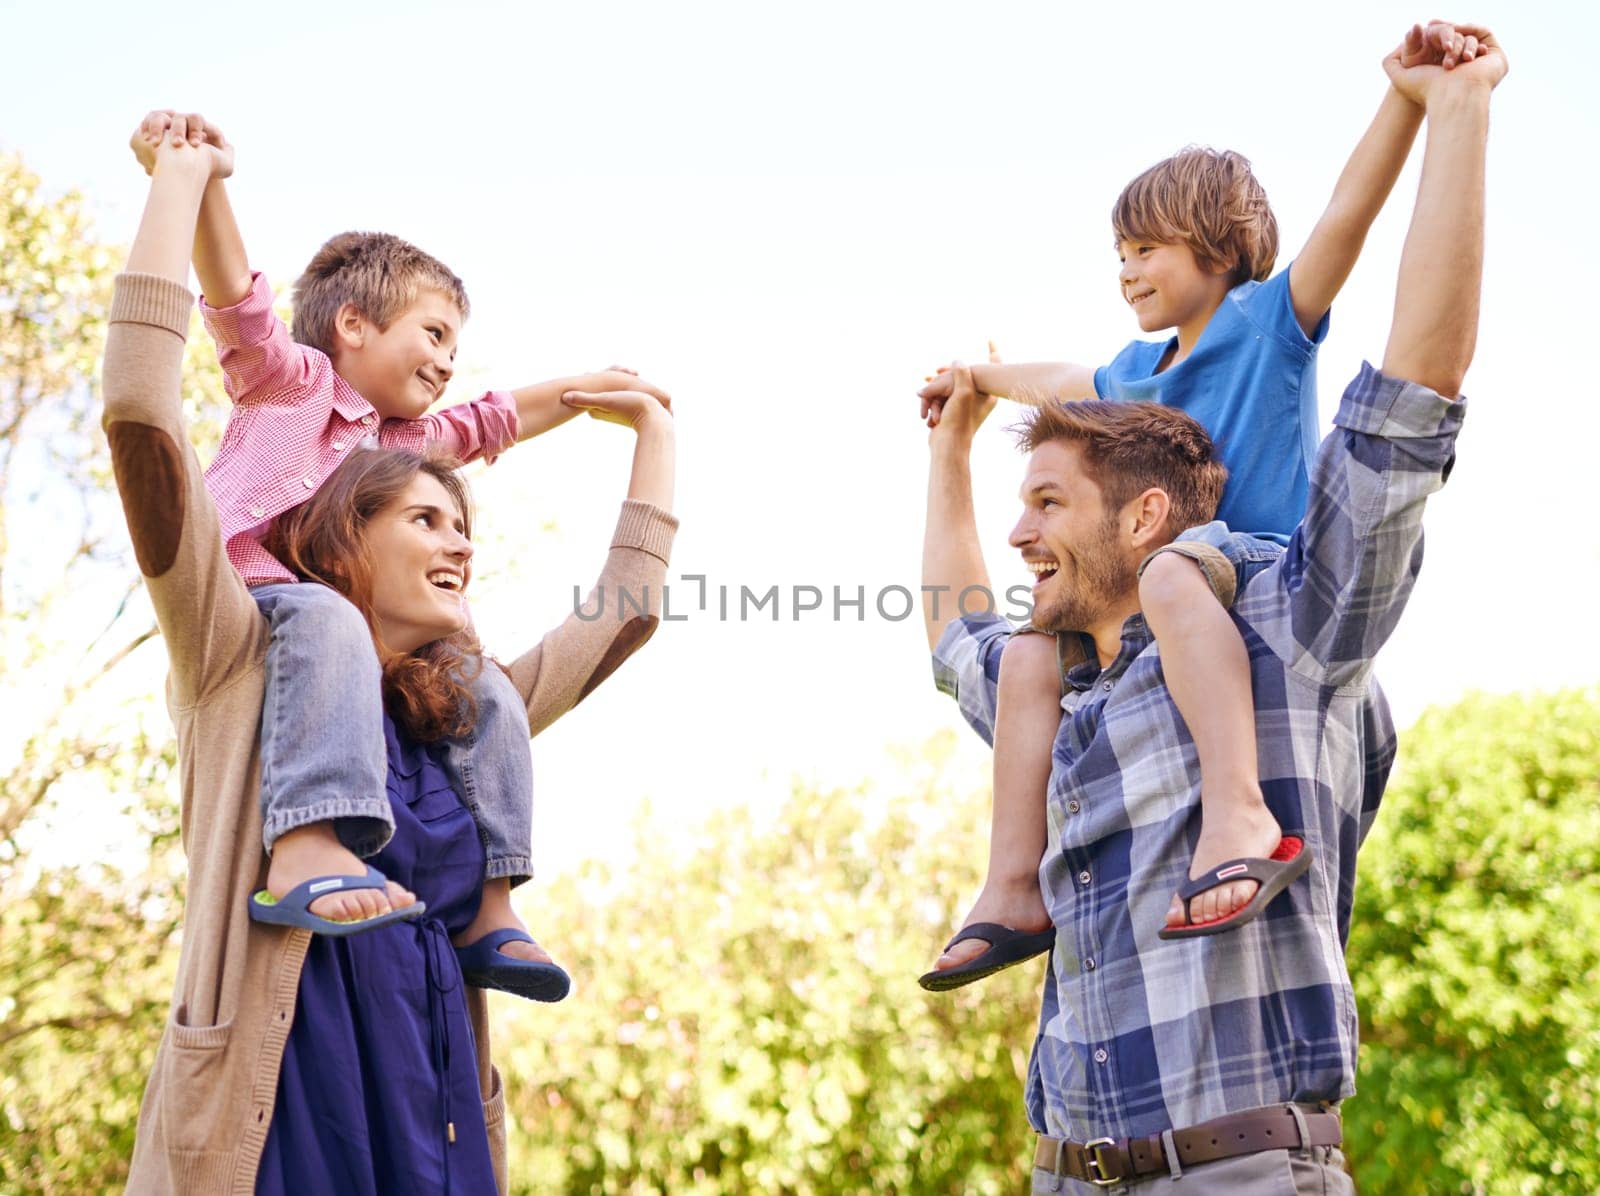 Smile, nature and kids on parents shoulders in outdoor park or field for playing together. Happy, bonding and young mother and father carrying boy kids for fun in garden in Canada for summer